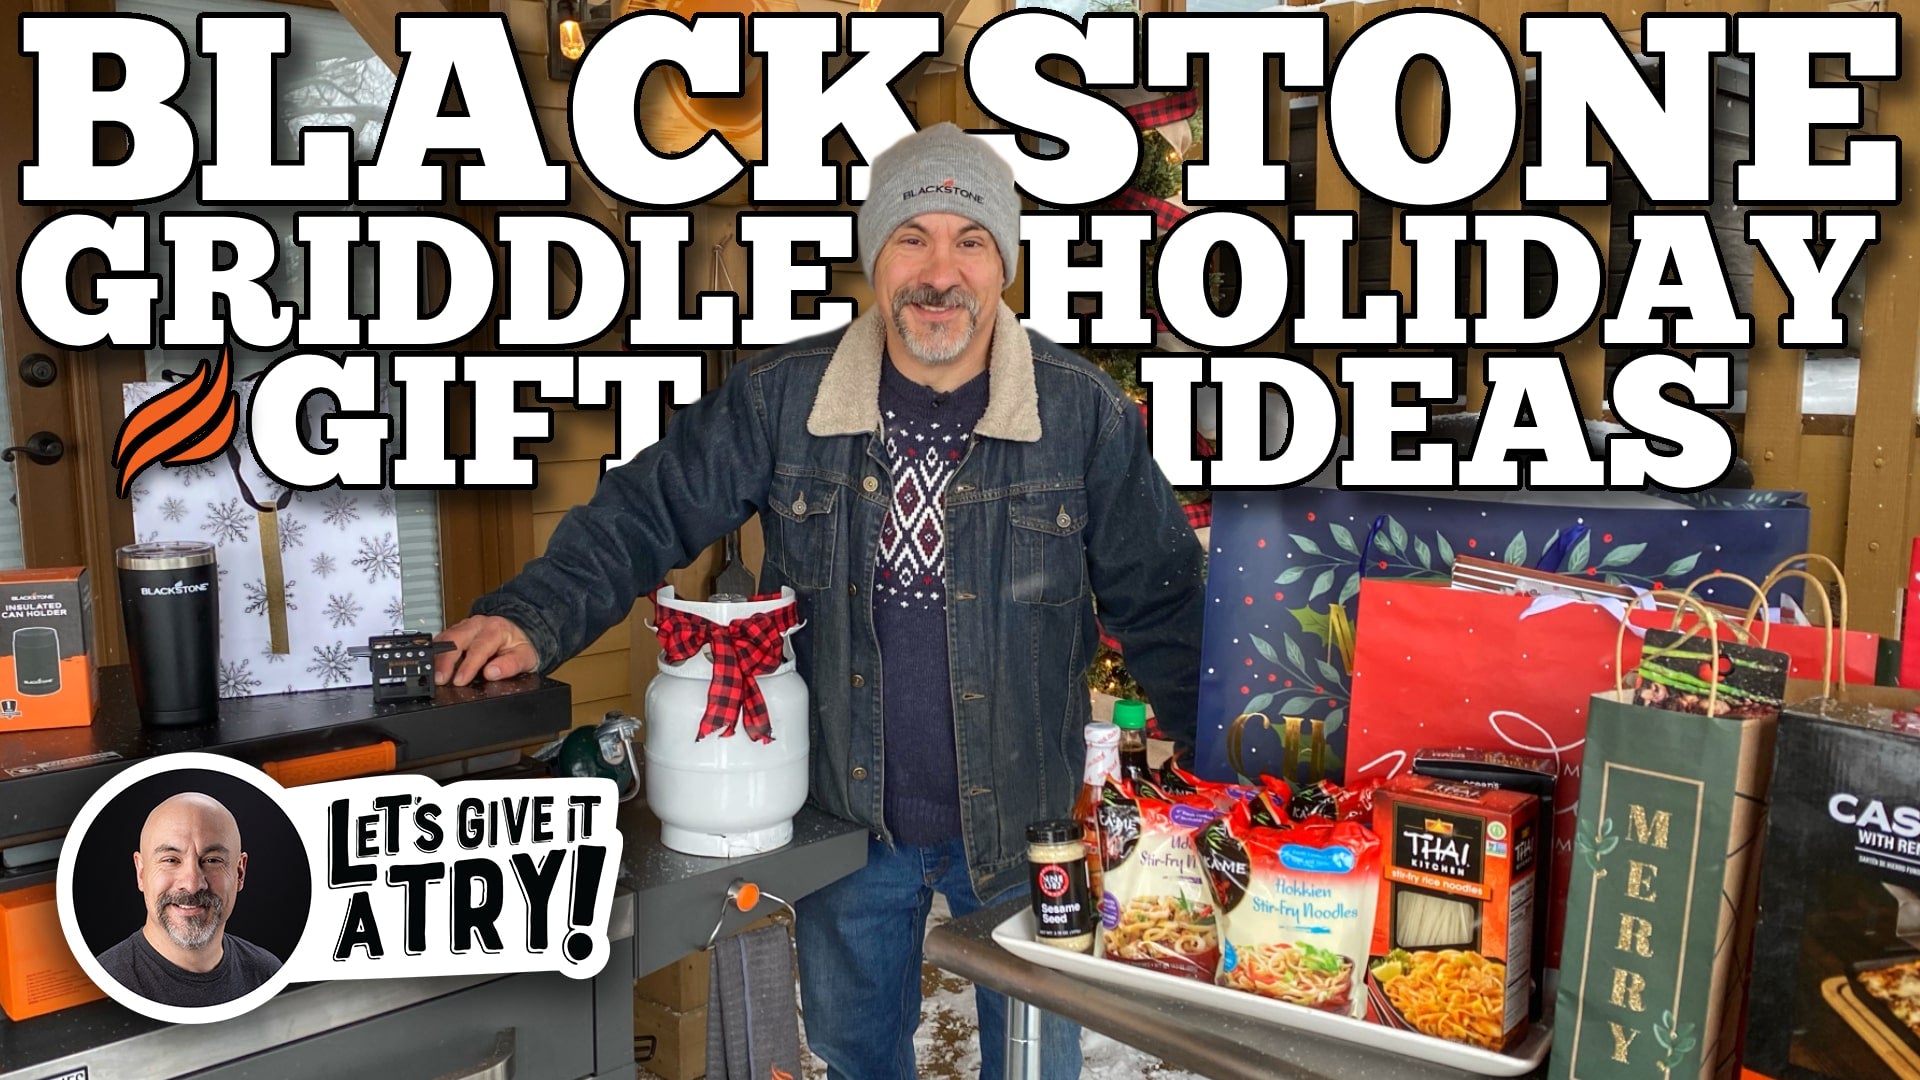 Blackstone Holiday Gift Guide – Blackstone Products